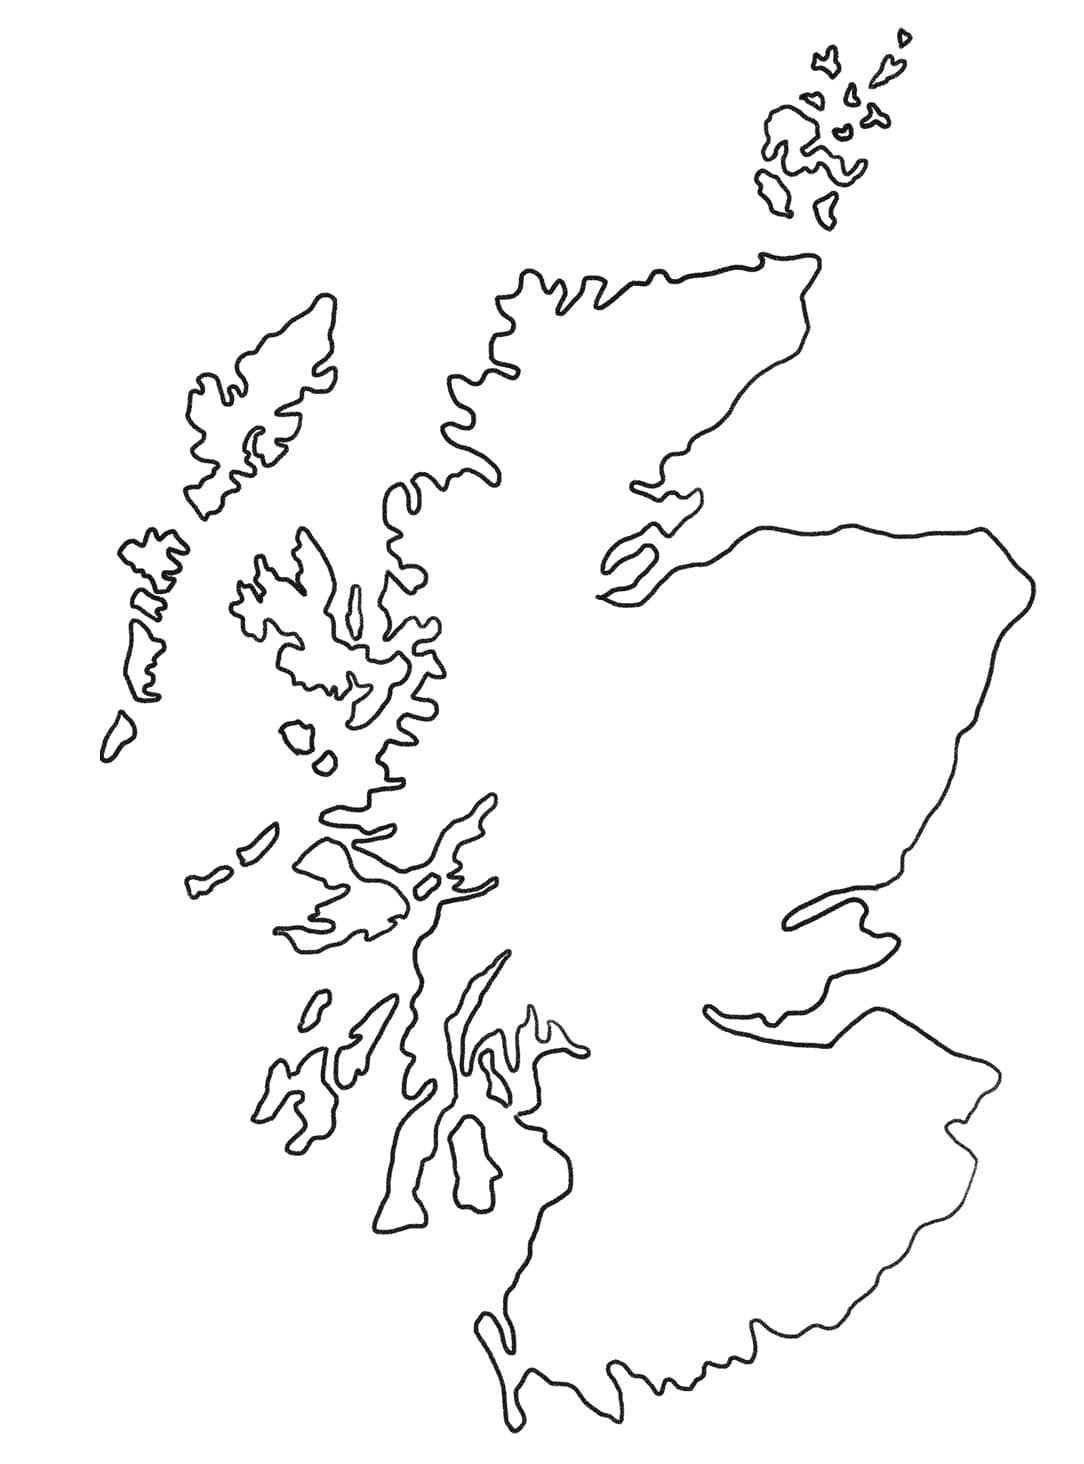 Scotland Map 1 Coloring Page - Free Printable Coloring Pages for Kids